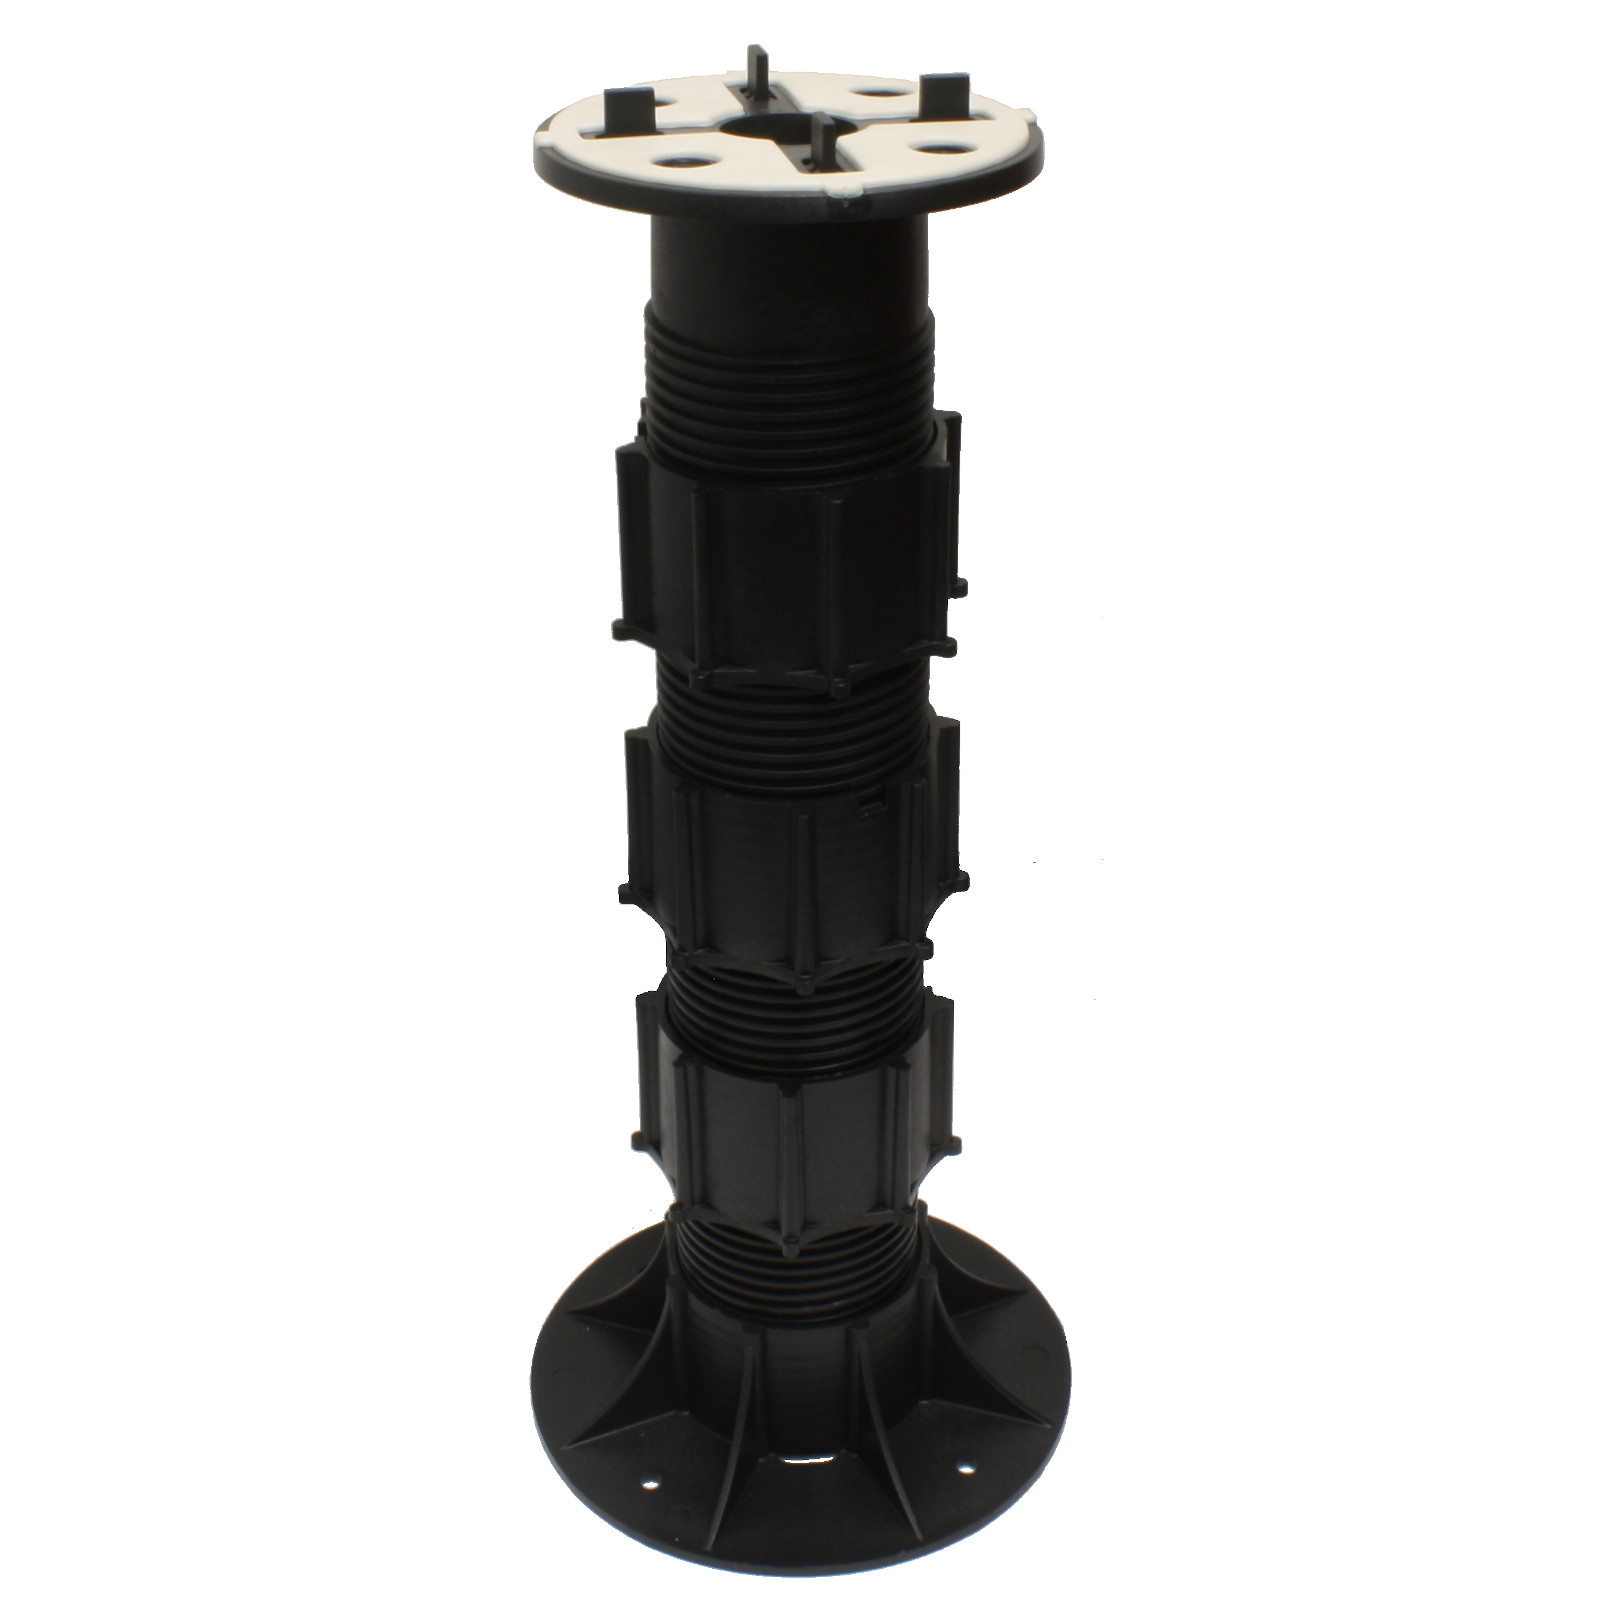 SE13 Adj Ped Support w/ Three-in-One Self Leveling Head 12.4” ‐ 19.75” (315‐500Mm)